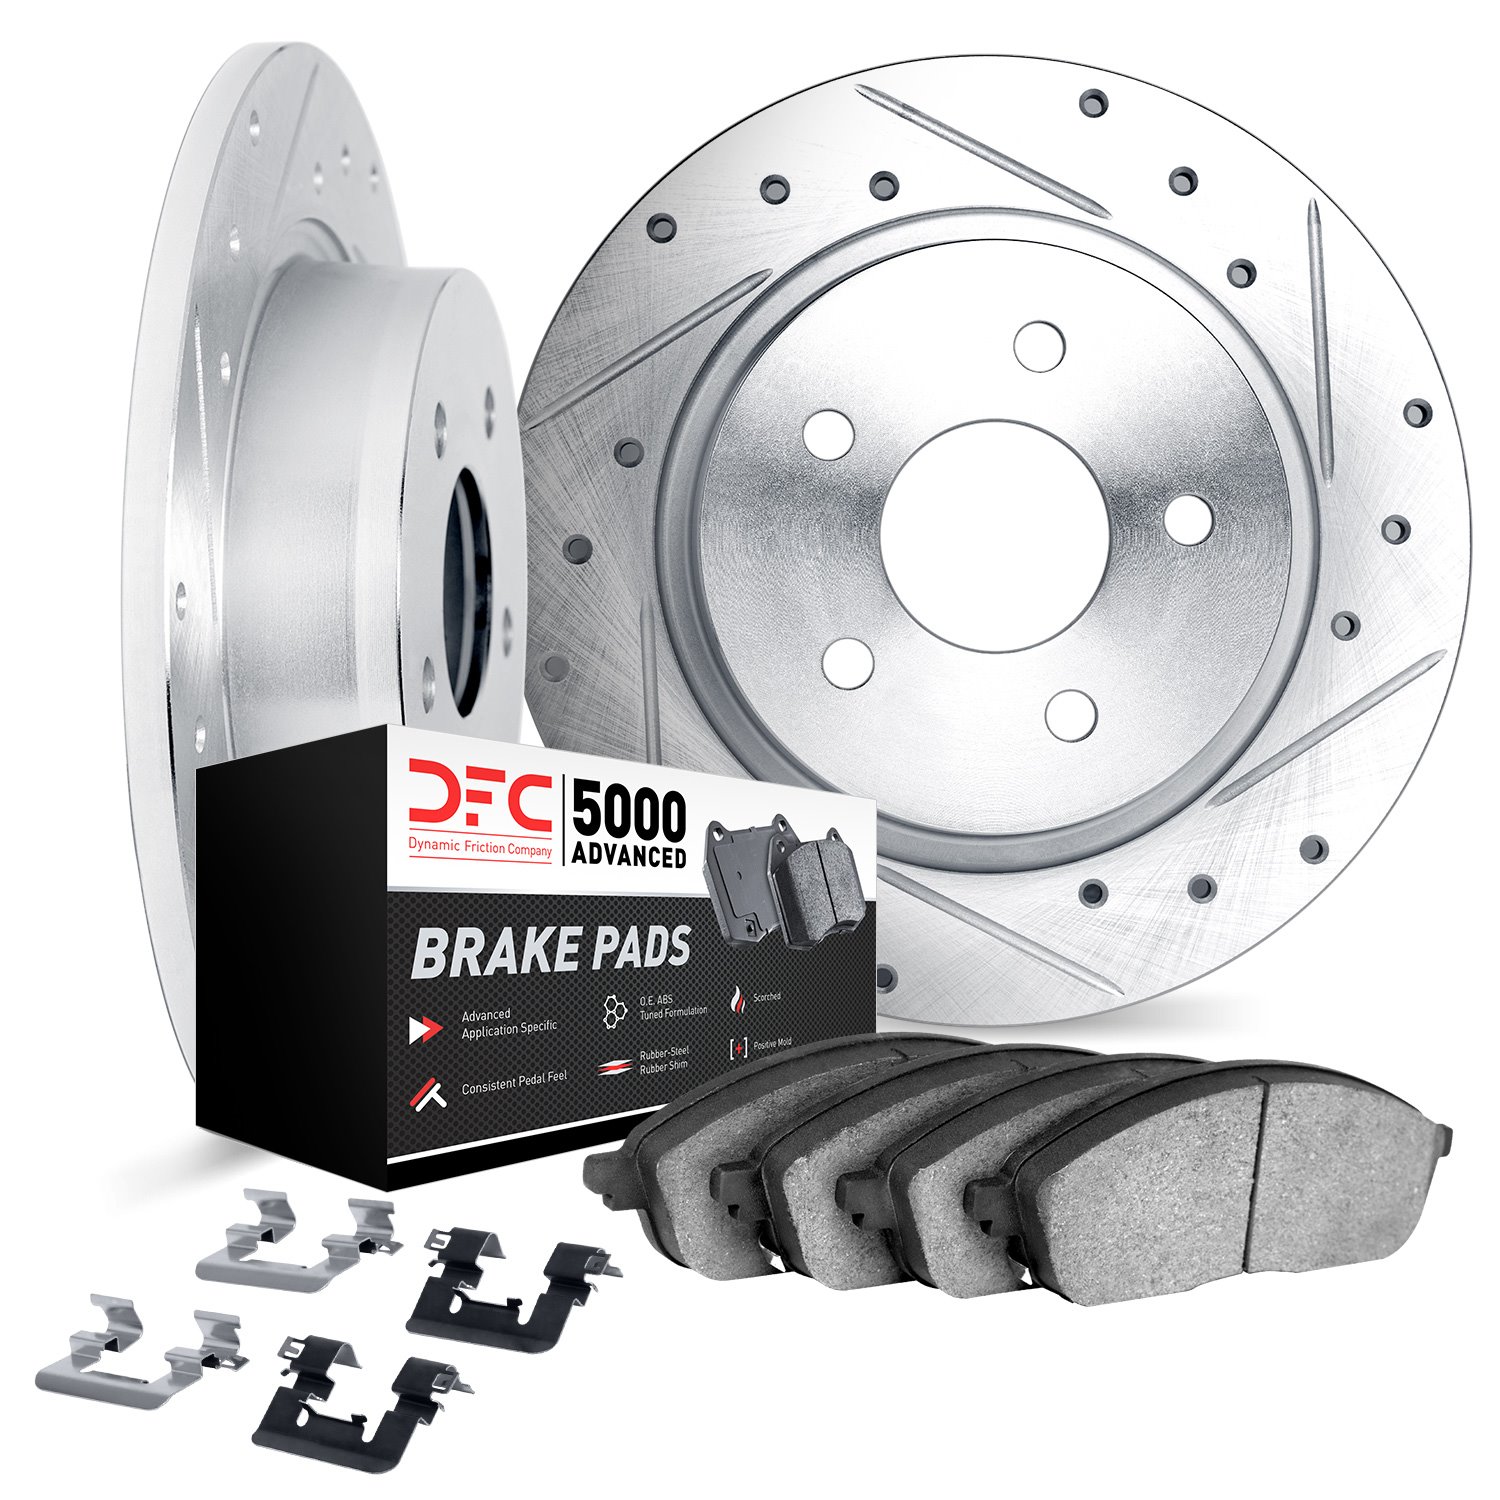 7512-73081 Drilled/Slotted Brake Rotors w/5000 Advanced Brake Pads Kit & Hardware [Silver], Fits Select Audi/Volkswagen, Positio